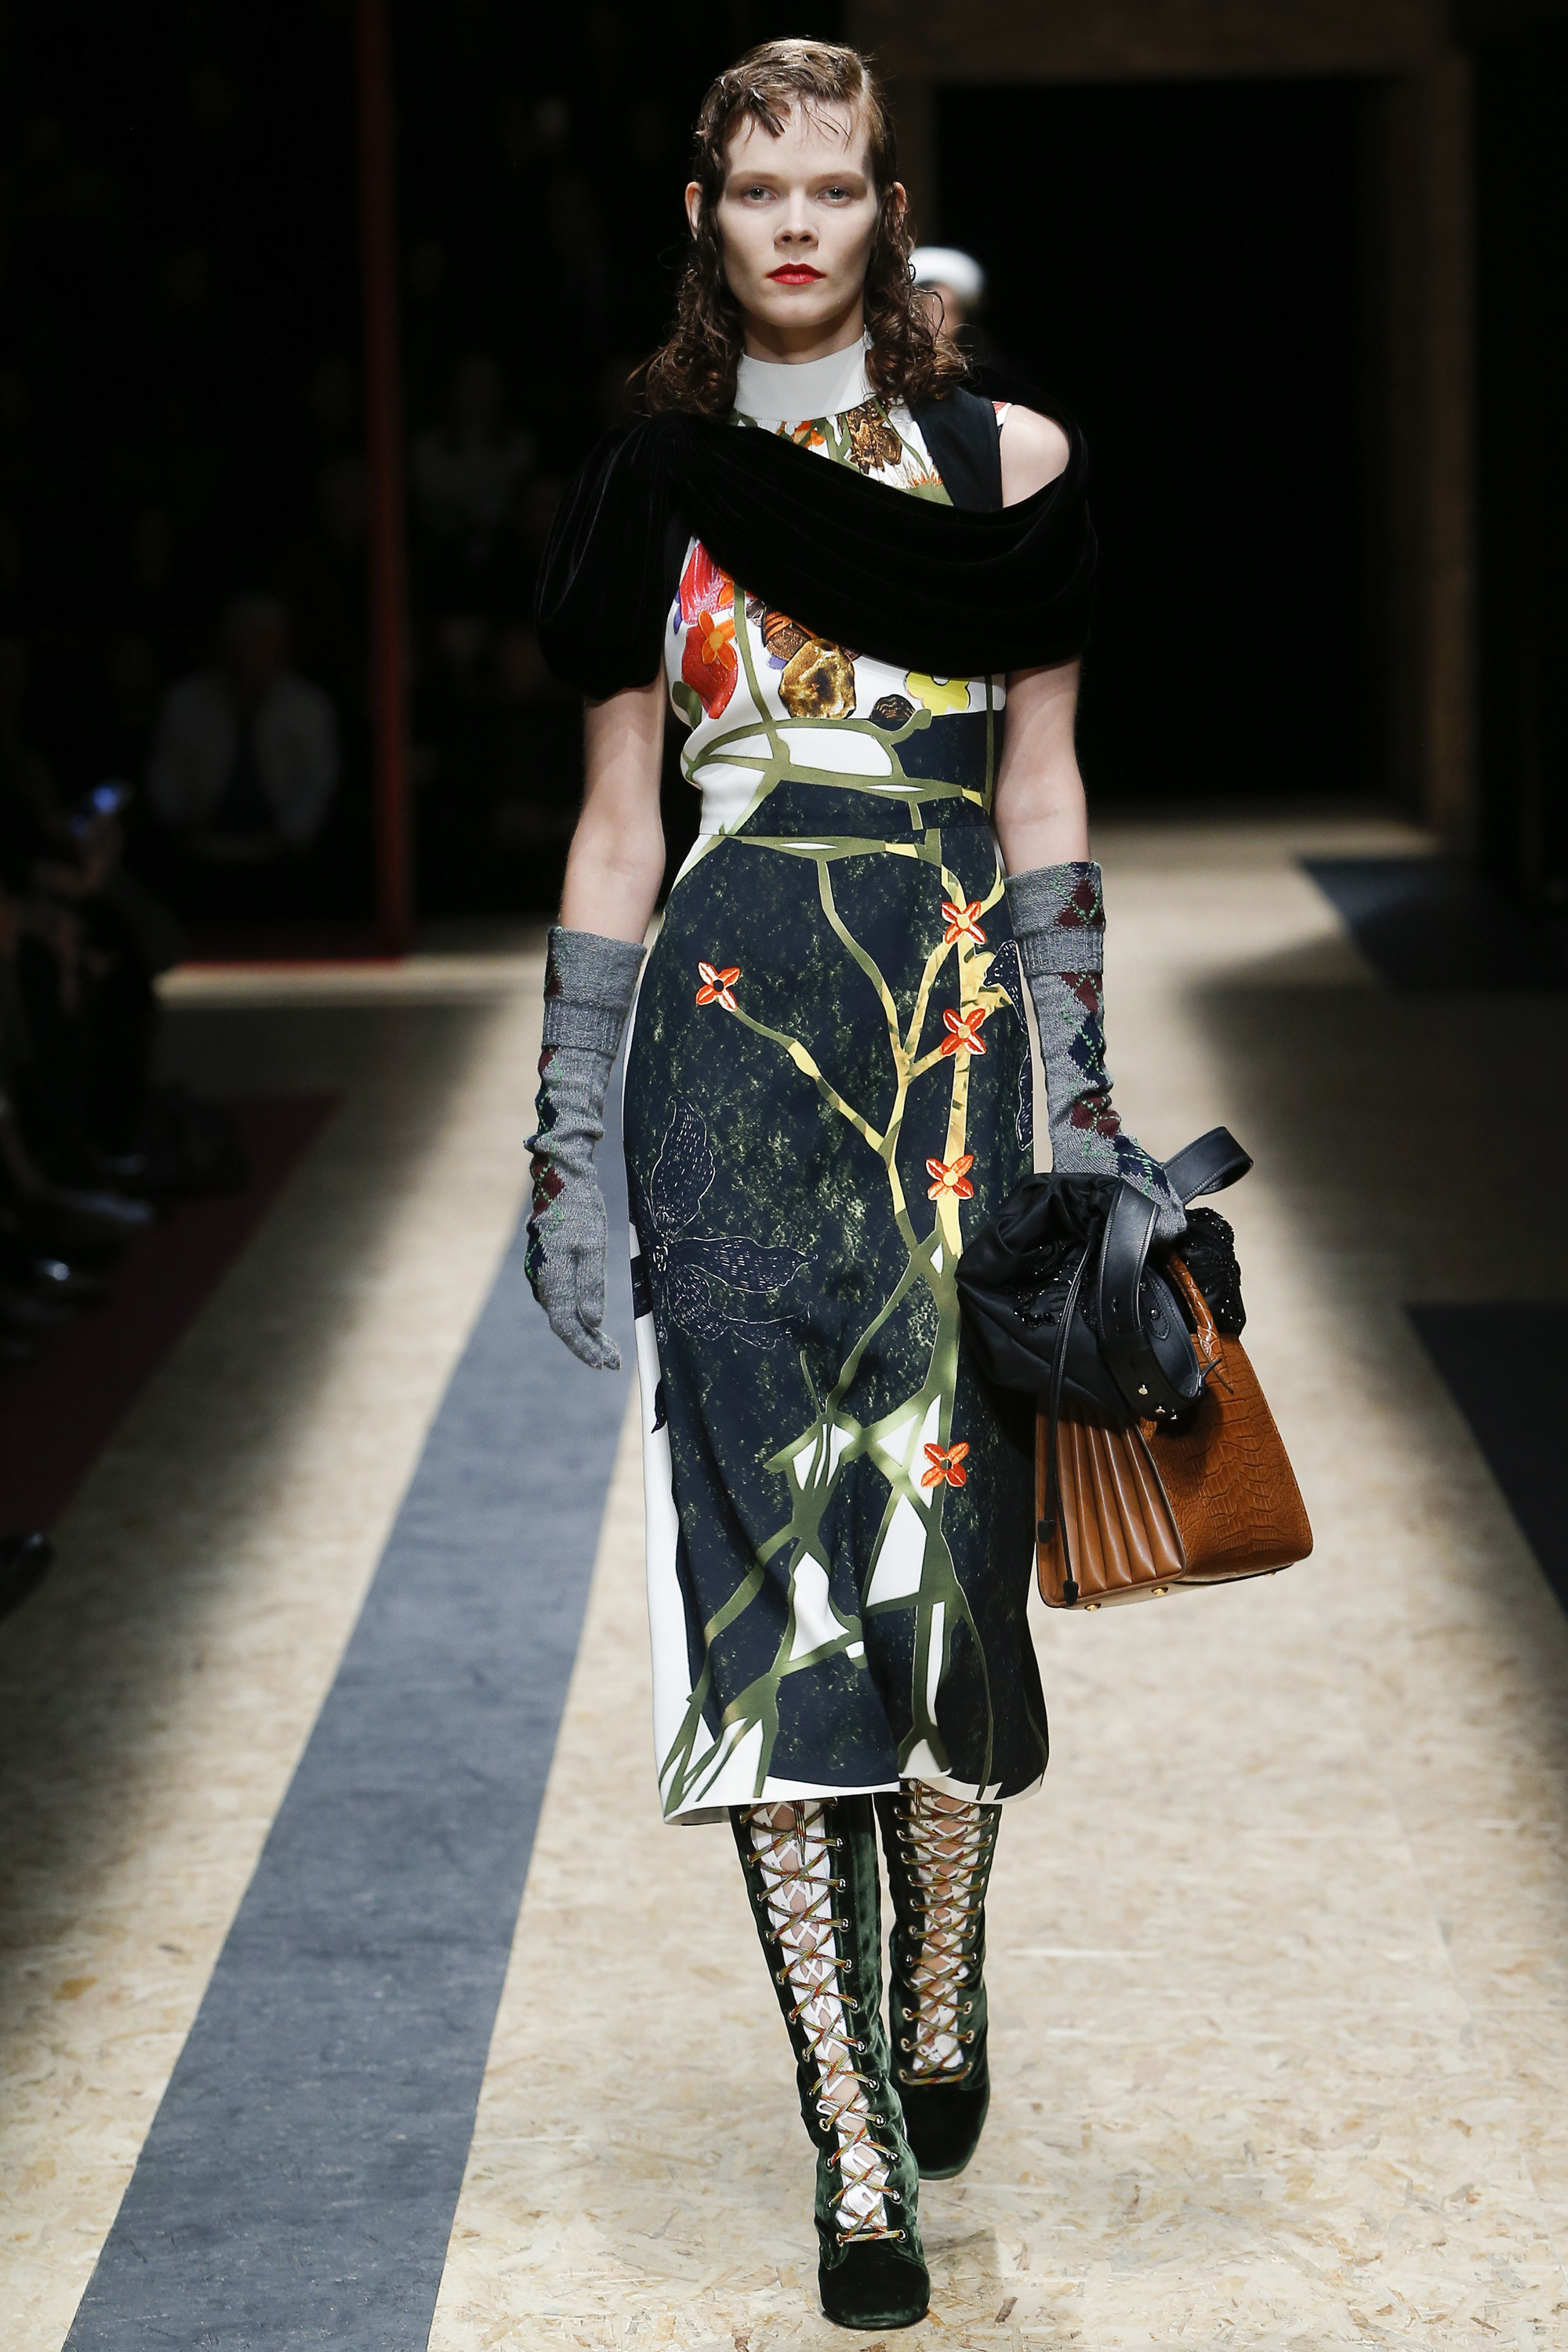 Prada Fall 2016 Ready To Wear - 50s style skirts and tights - Fashionsizzle